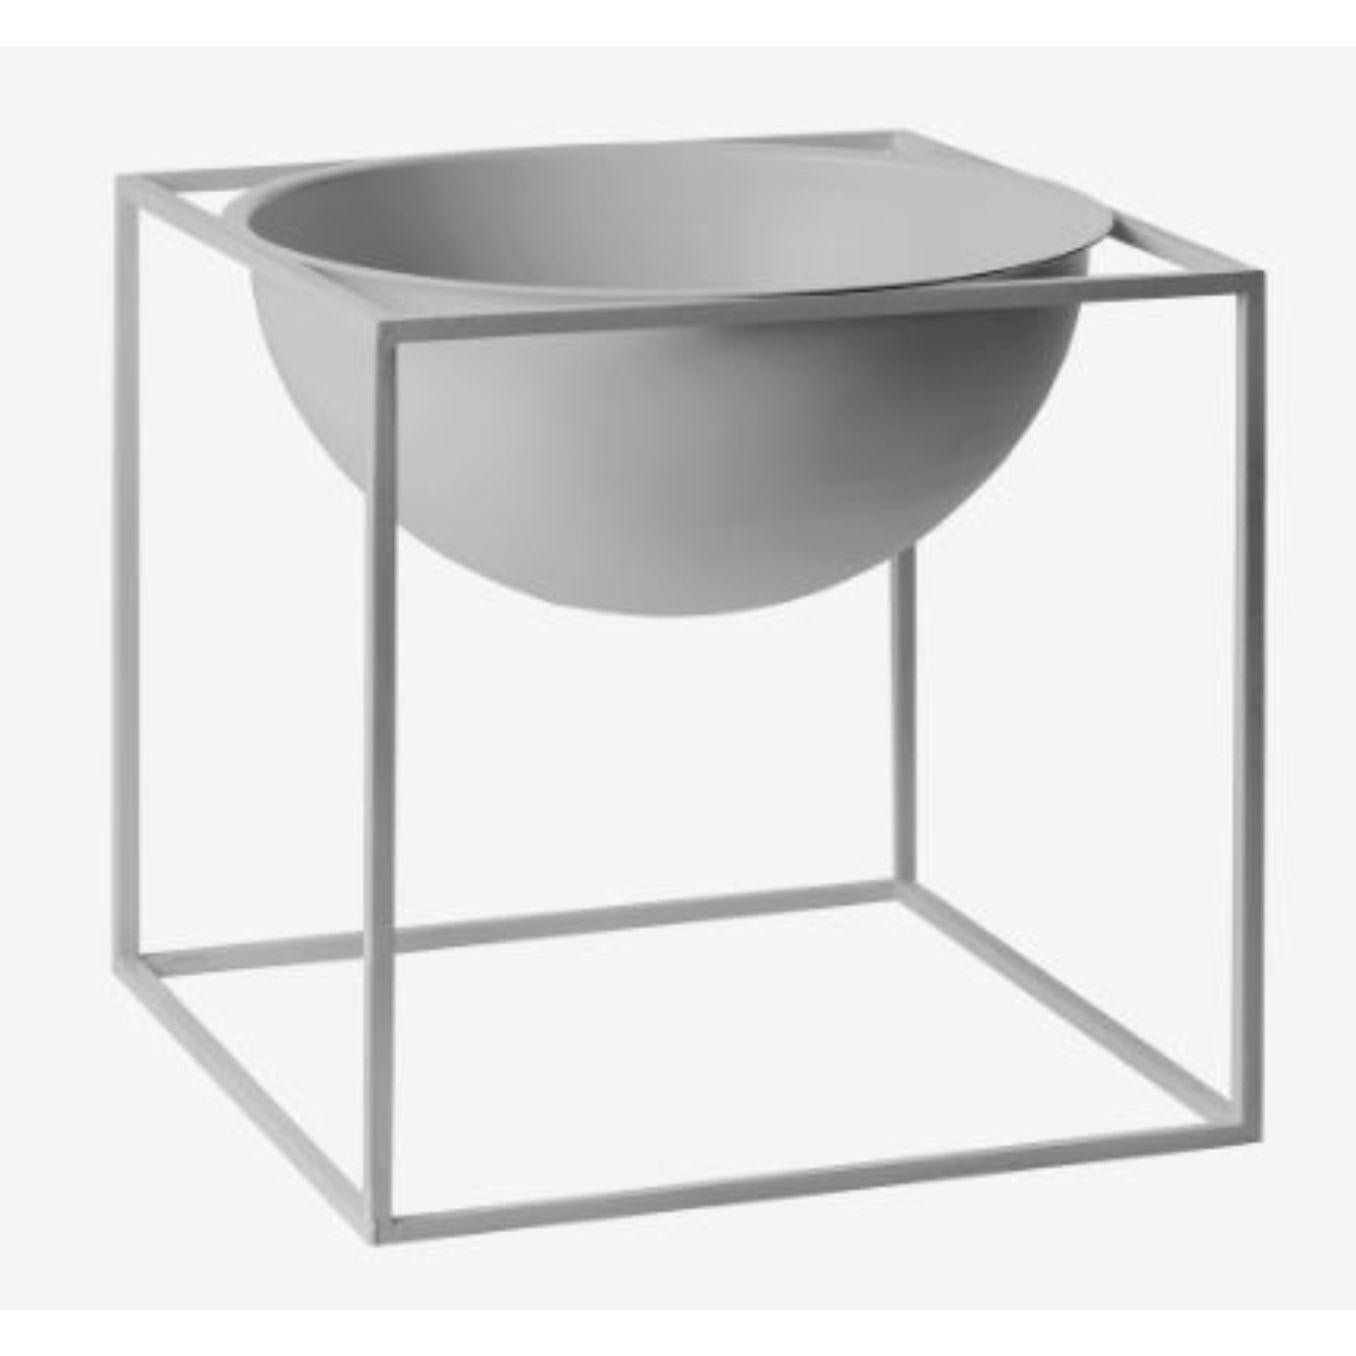 Cool grey large Kubus bowl by Lassen
Dimensions: D 23 x W 23 x H 23 cm 
Materials: metal 
Weight: 3 Kg

Kubus Bowl is based on original sketches by Mogens Lassen, and contains elements from Bauhaus, which Mogens Lassen took inspiration from.